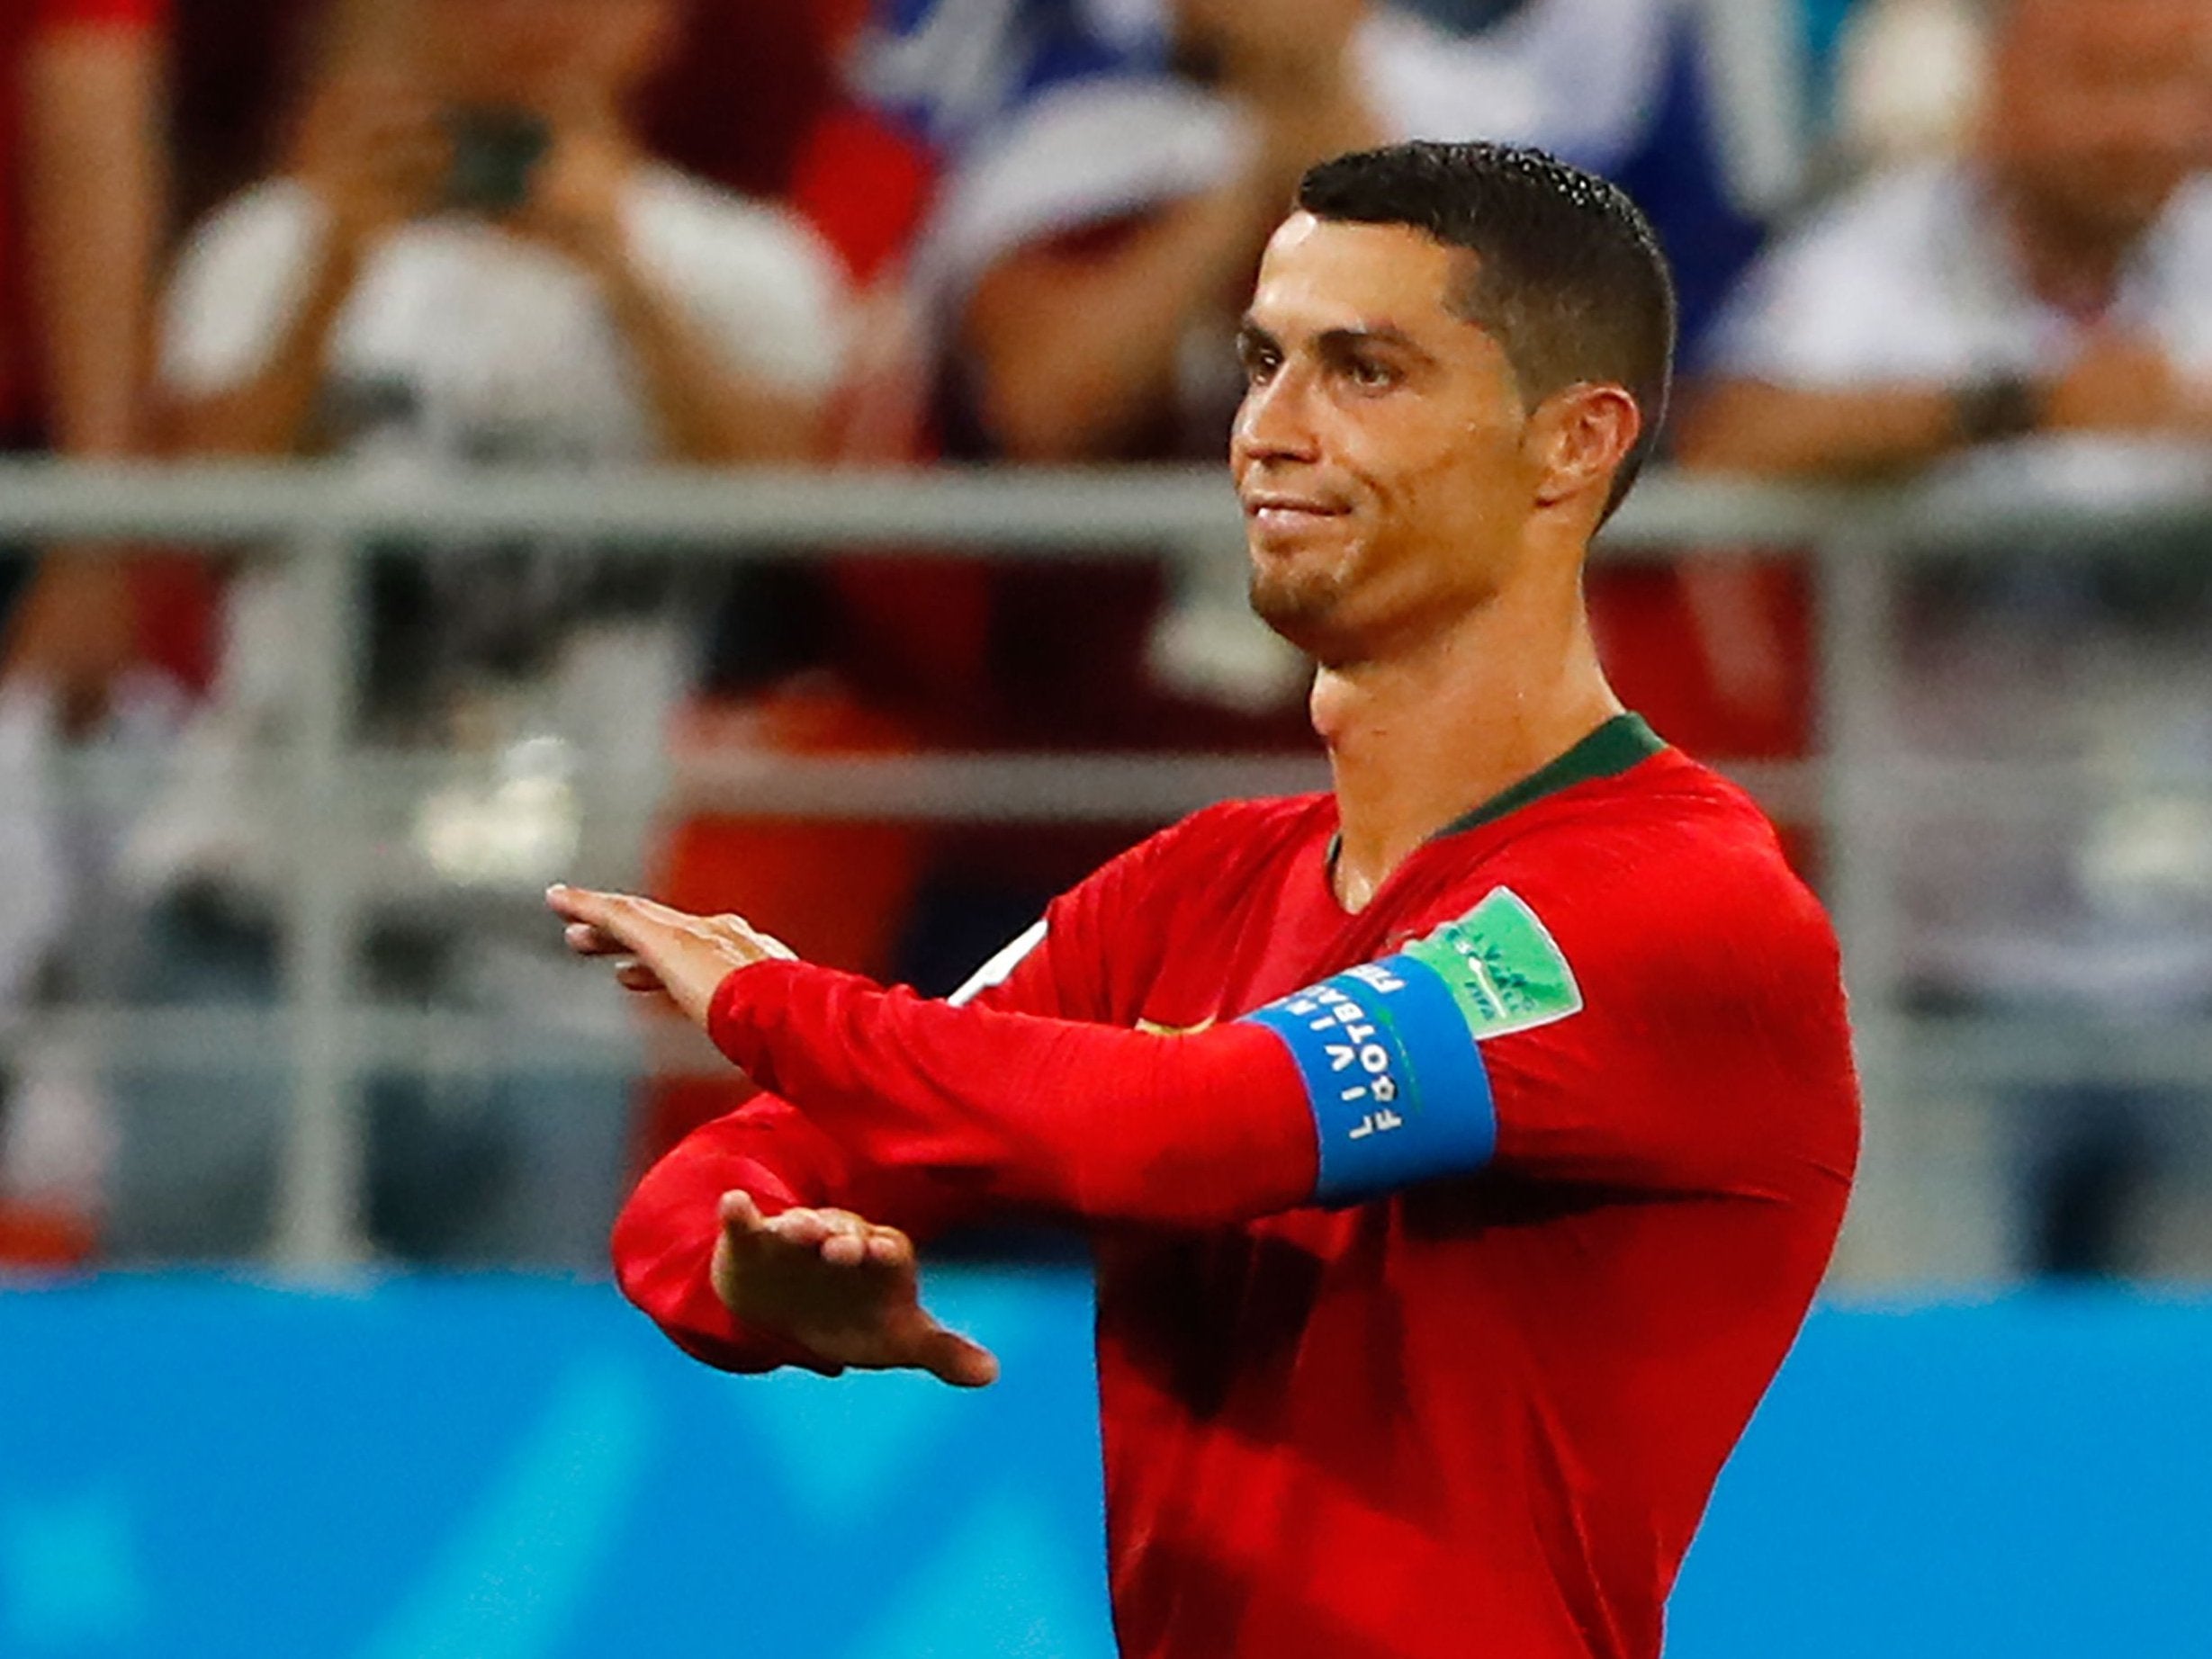 World Cup 2018 – LIVE: Latest news from Portugal and Spain VAR controversy, plus Nigeria vs Argentina and Lionel Messi updates, predictions, schedule and more